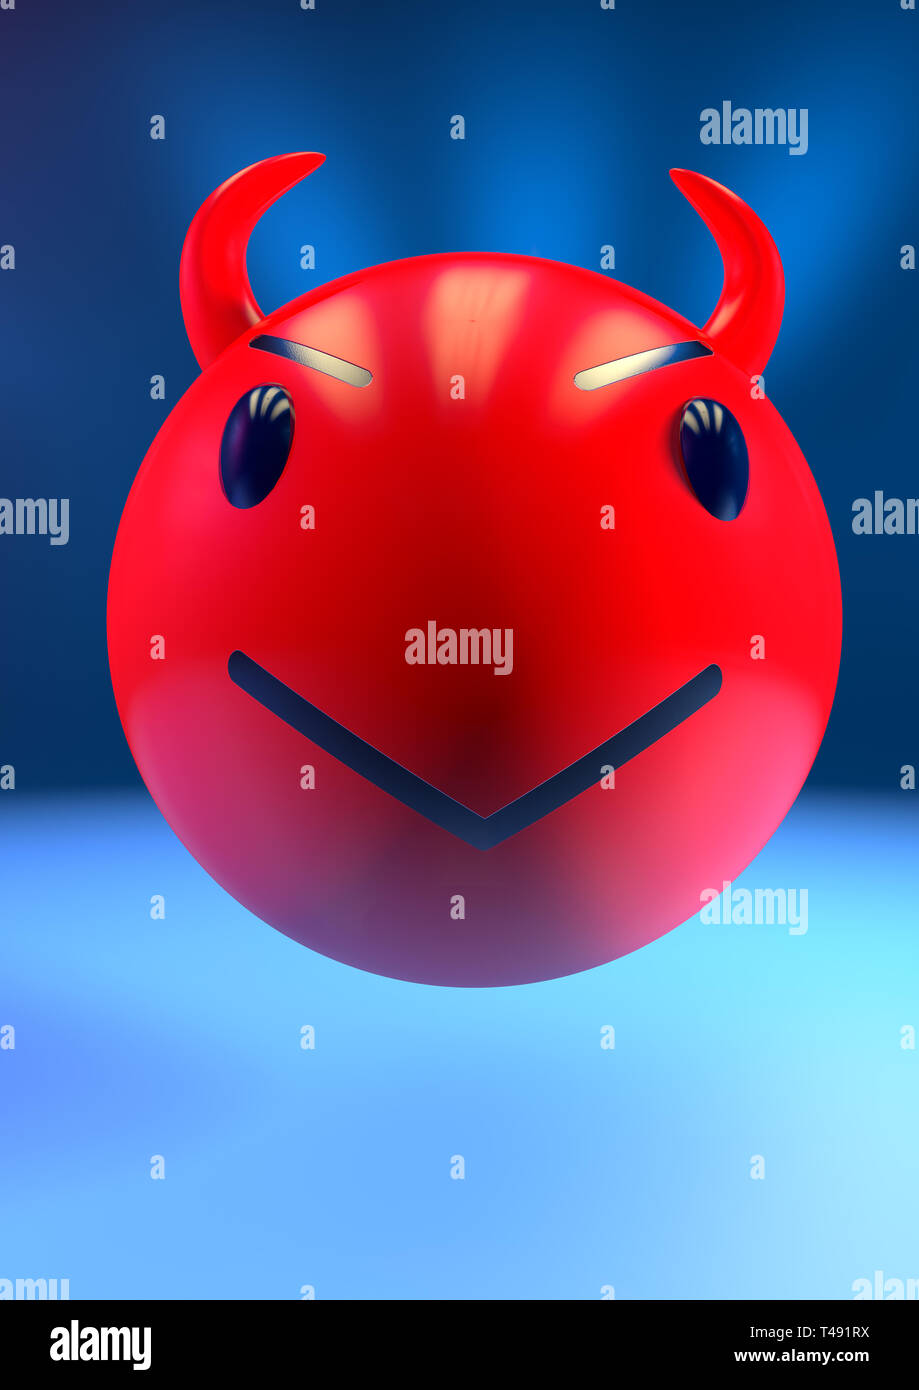 3D render of a round red devil emoji with horns and an evil grin on its face seen from the front Stock Photo